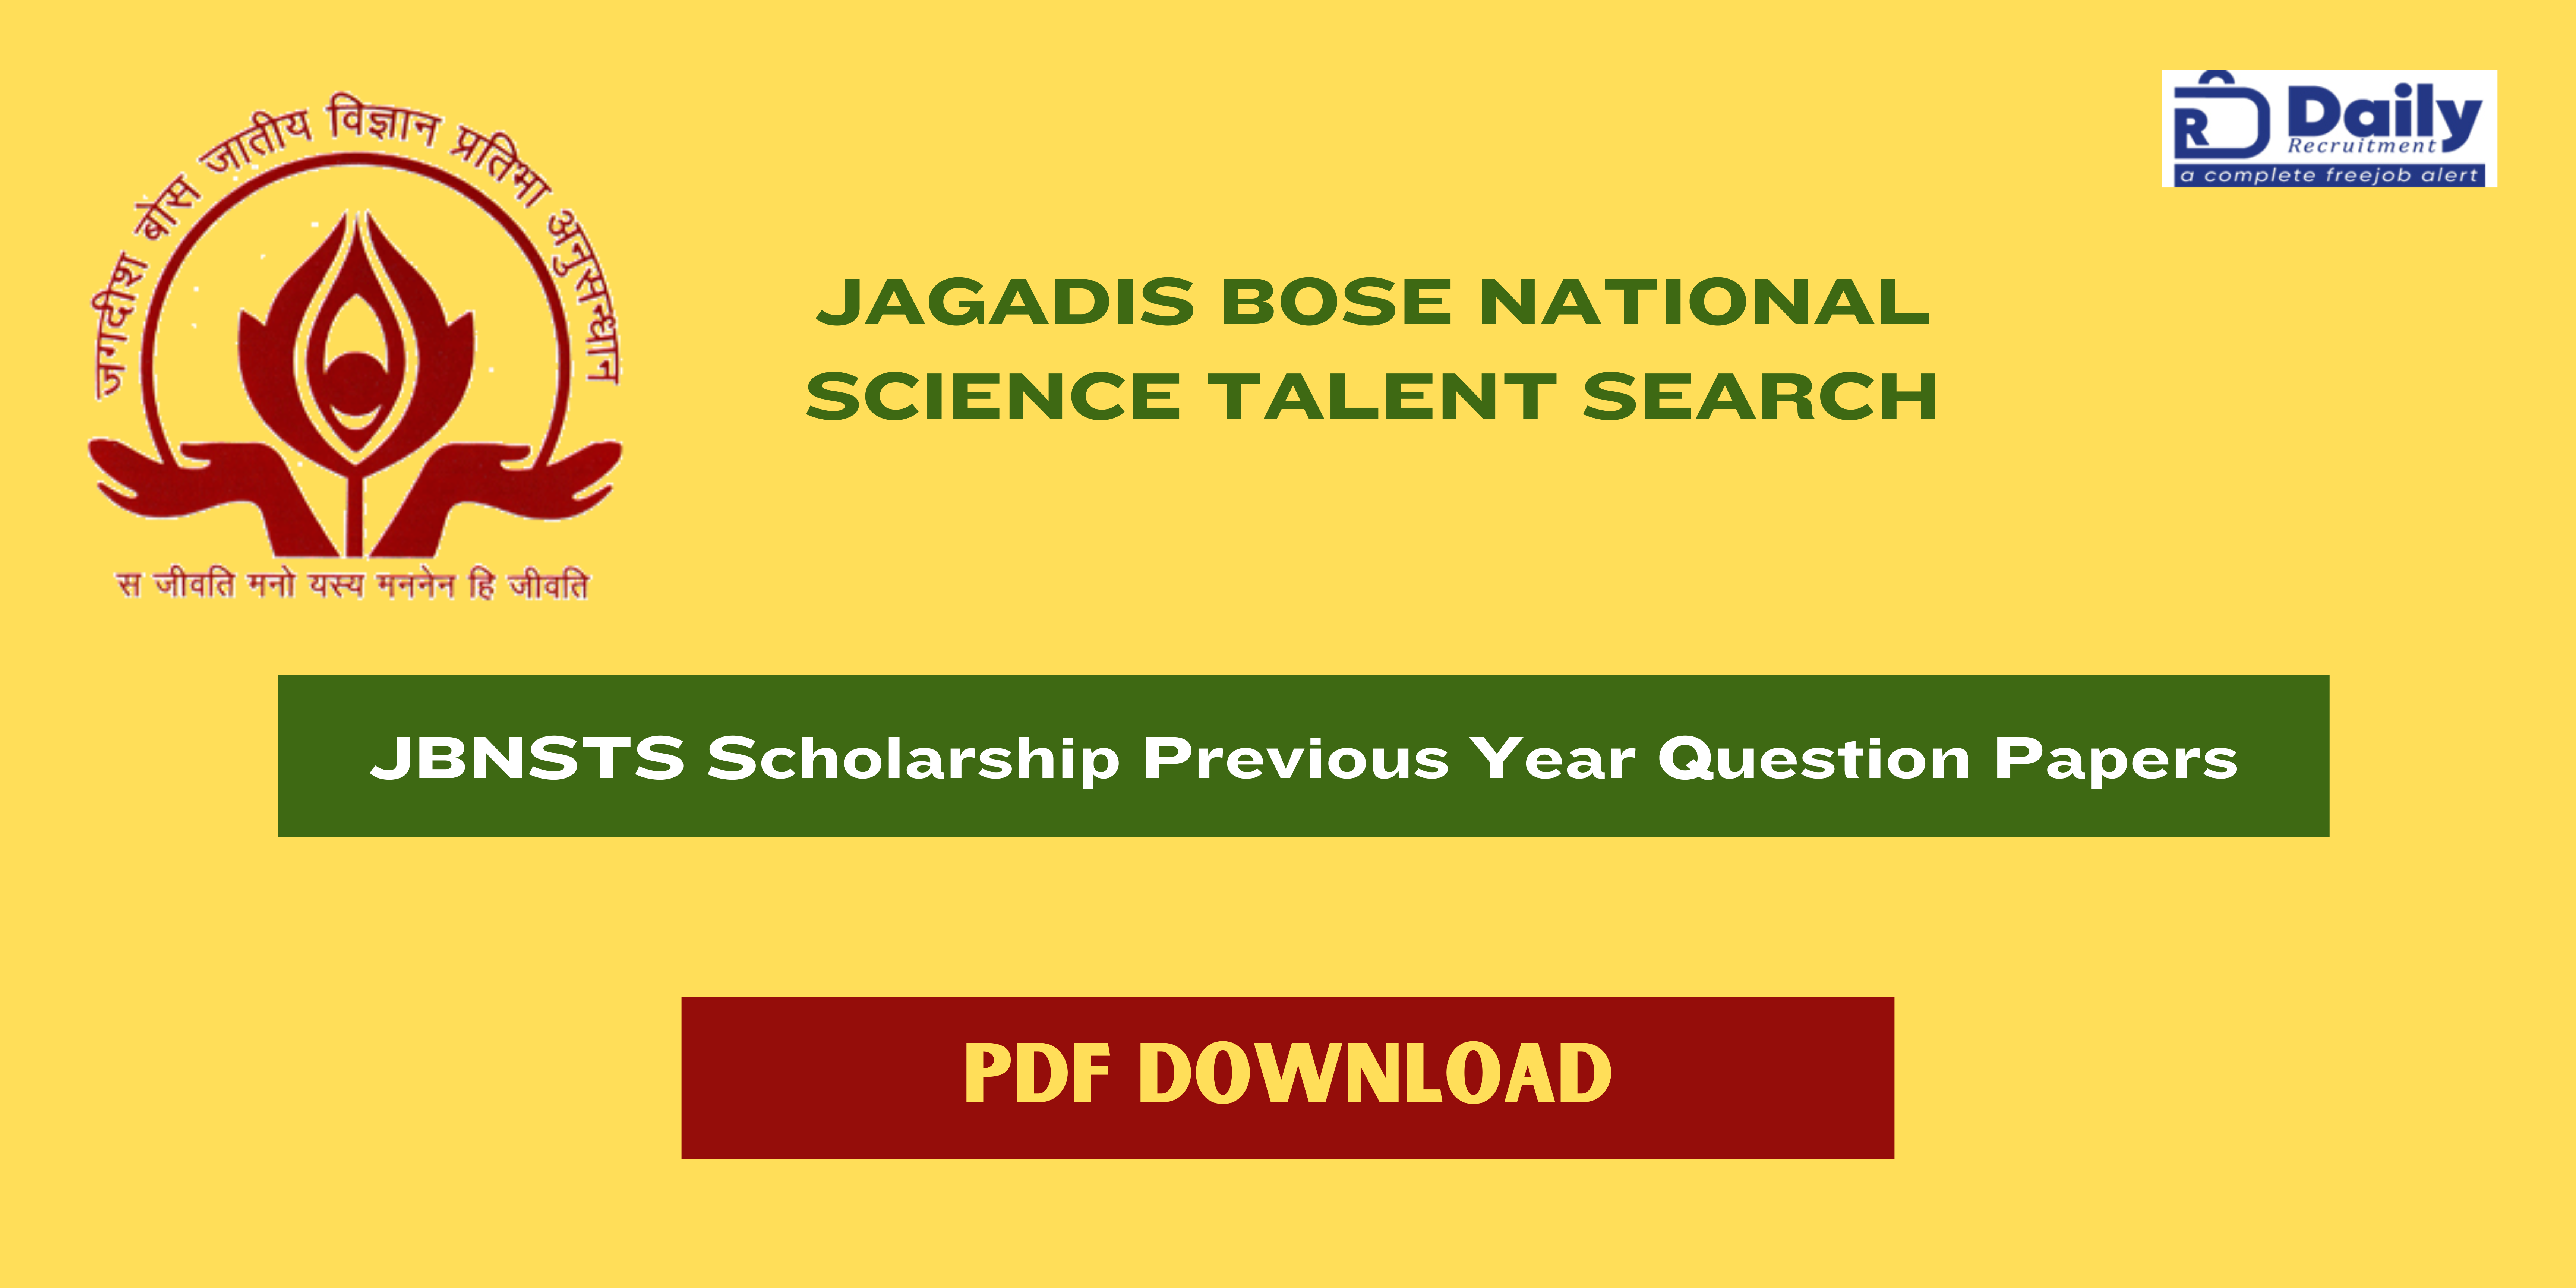 JBNSTS Scholarship Previous Year Questions